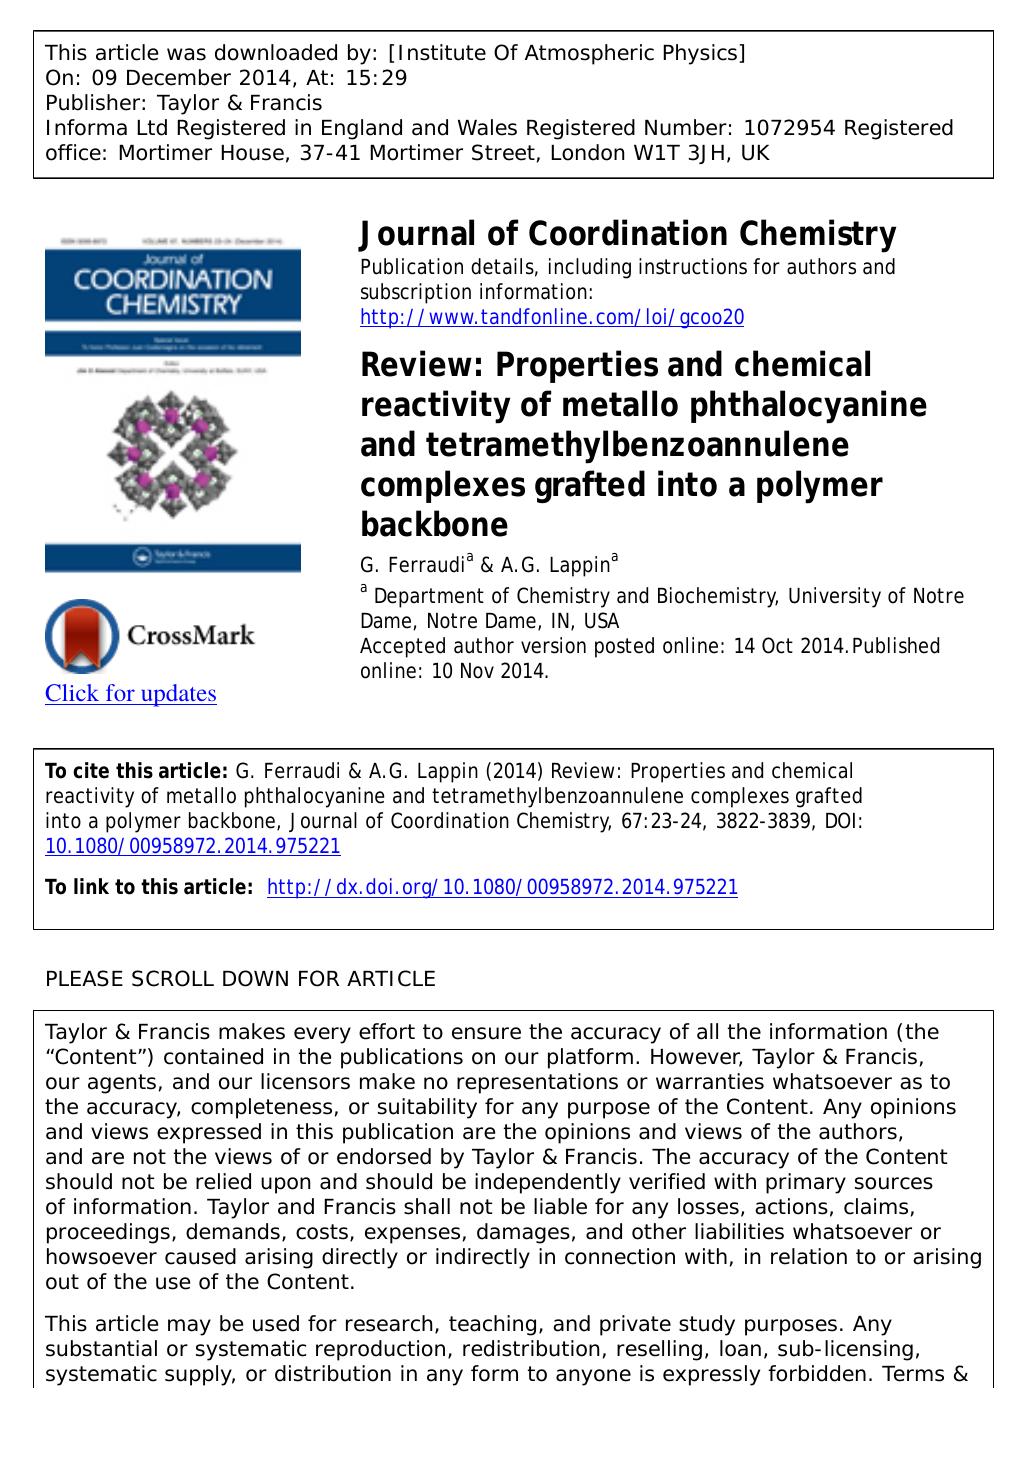 Review: Properties and chemical reactivity of metallo phthalocyanine and tetramethylbenzoannulene complexes grafted into a polymer backbone by G. Ferraudi